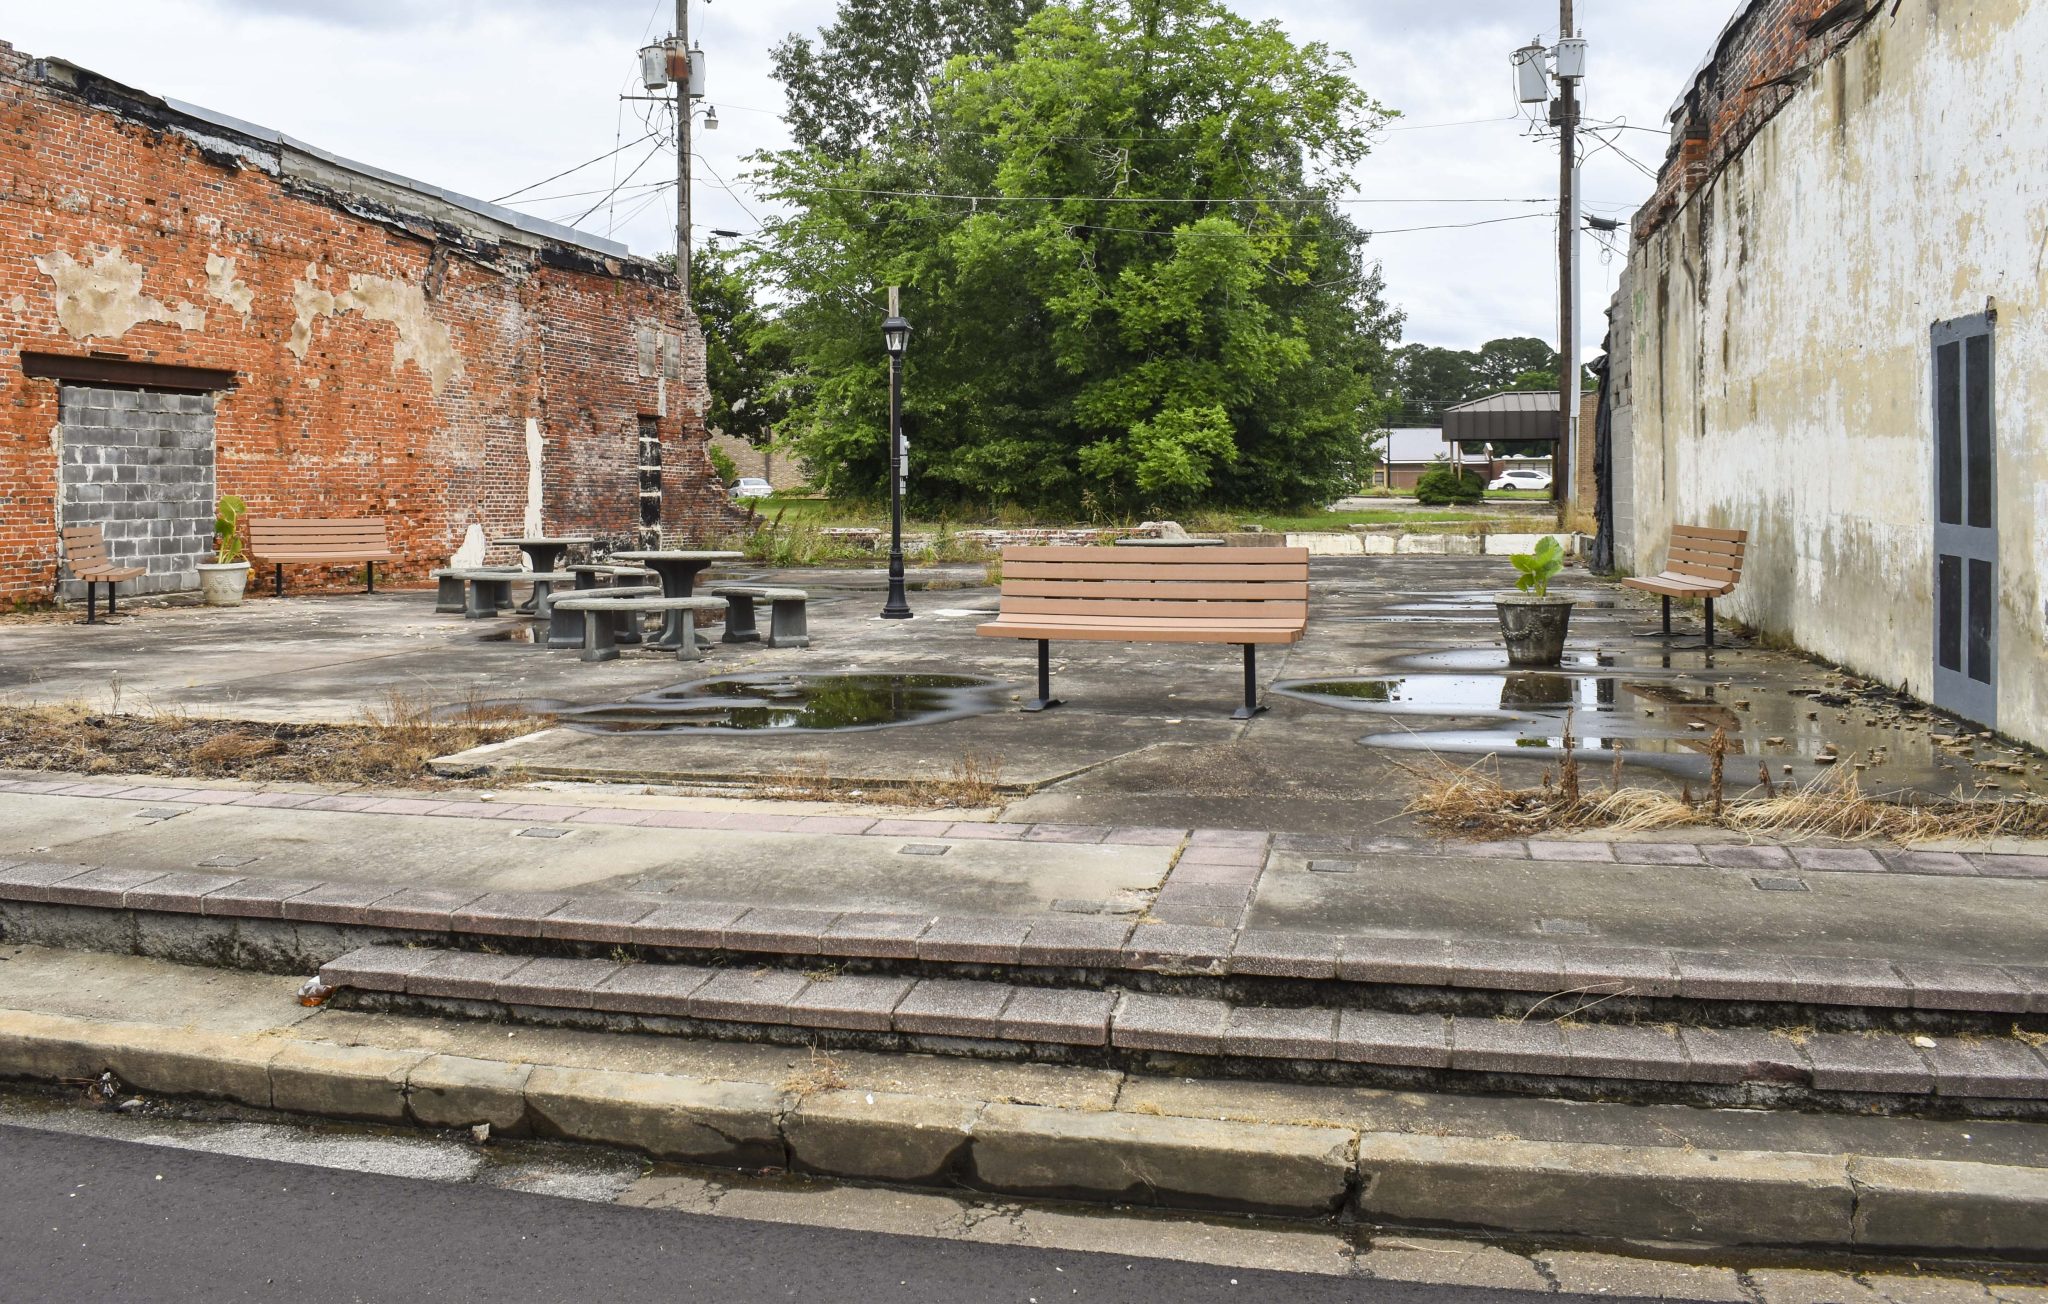 Several benches on pavement in Linden, Alabama